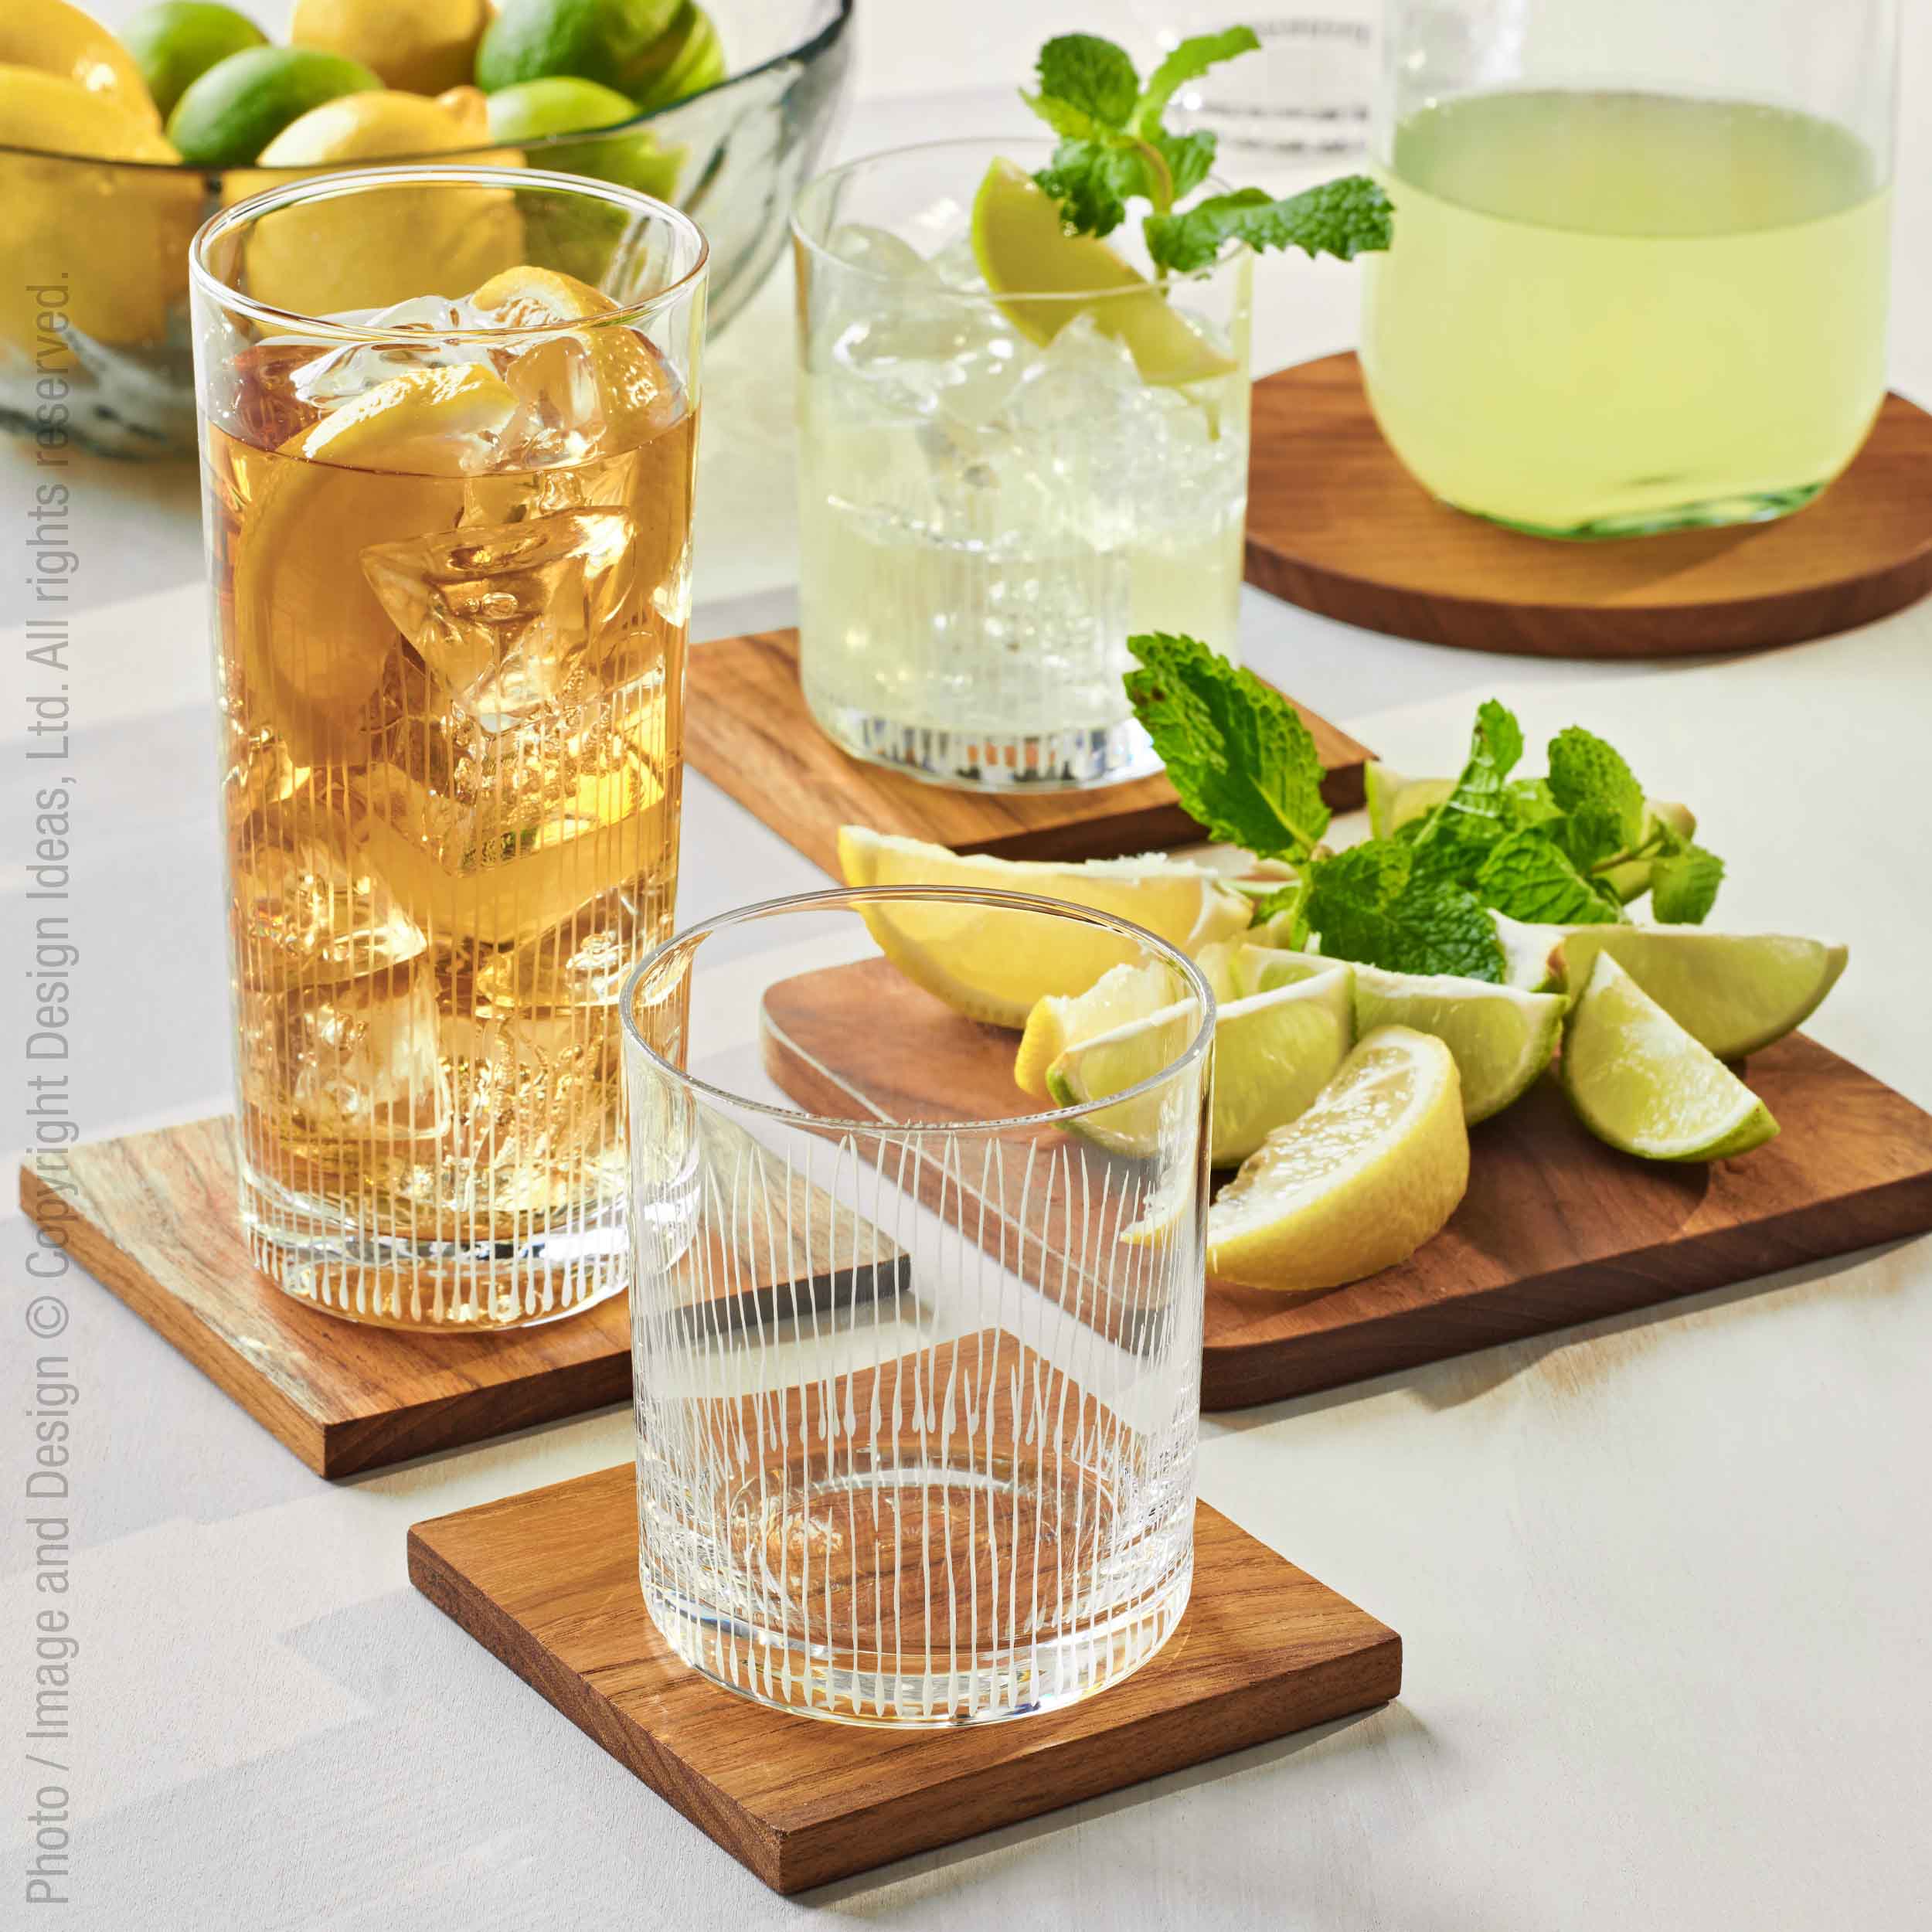 Endra™ drinking glass (11 oz.) - Clear | Image 4 | Premium Glass from the Endra collection | made with Glass for long lasting use | texxture